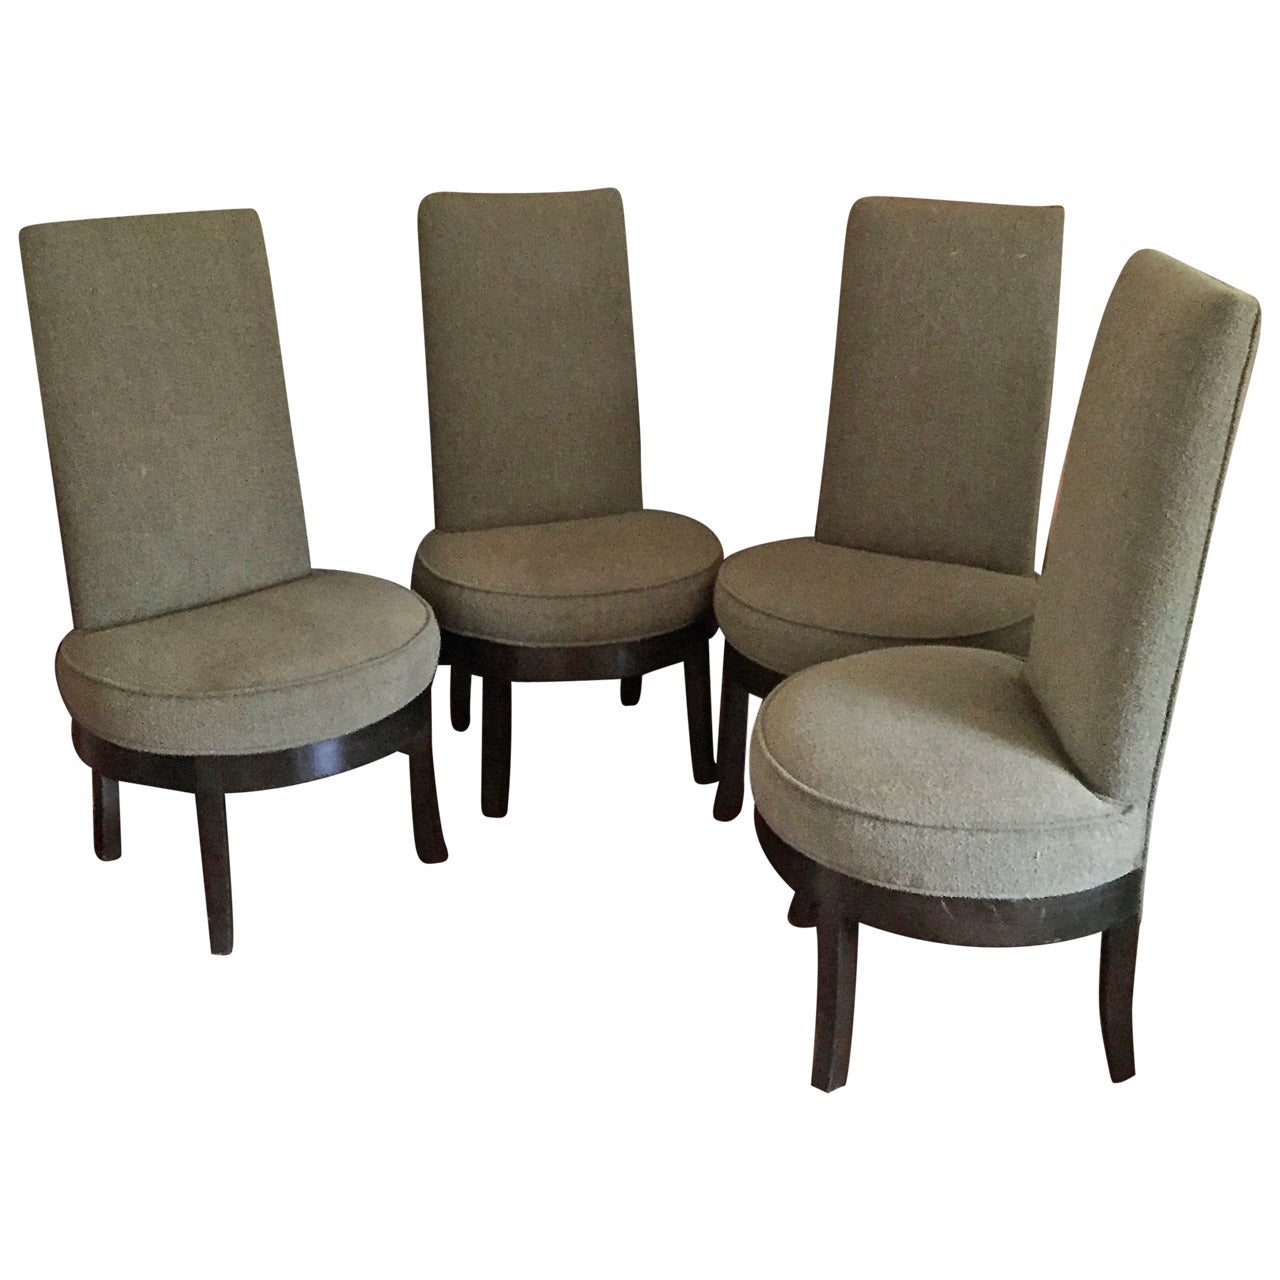 Set of Four High-Backed Dining Chairs in the Style of James Mont